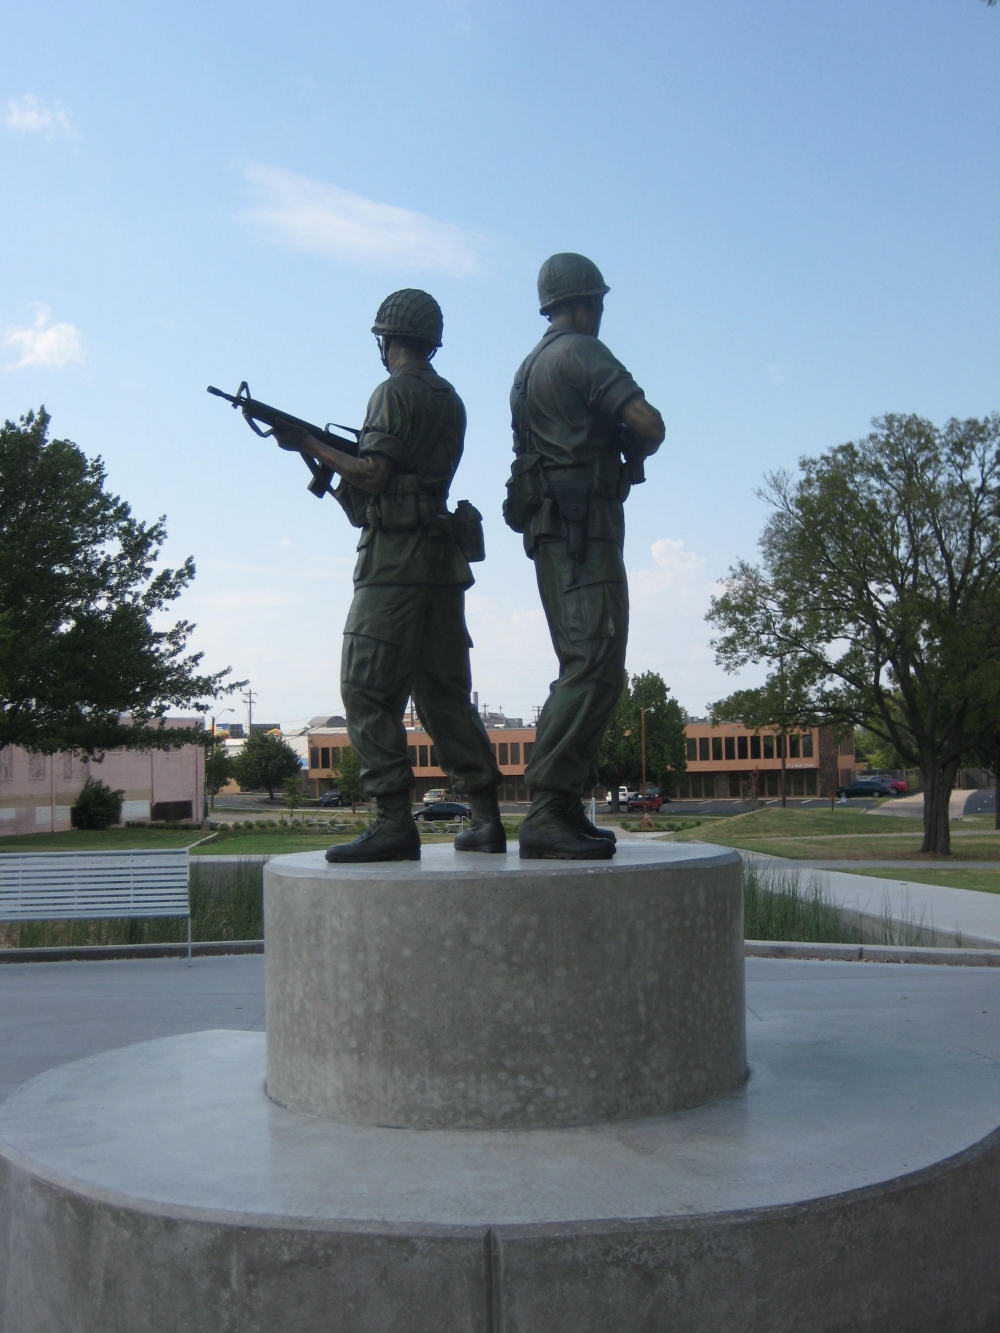 Oklahoma City – Military Park Vietnam War Memorial “Brothers in Arms” Monument